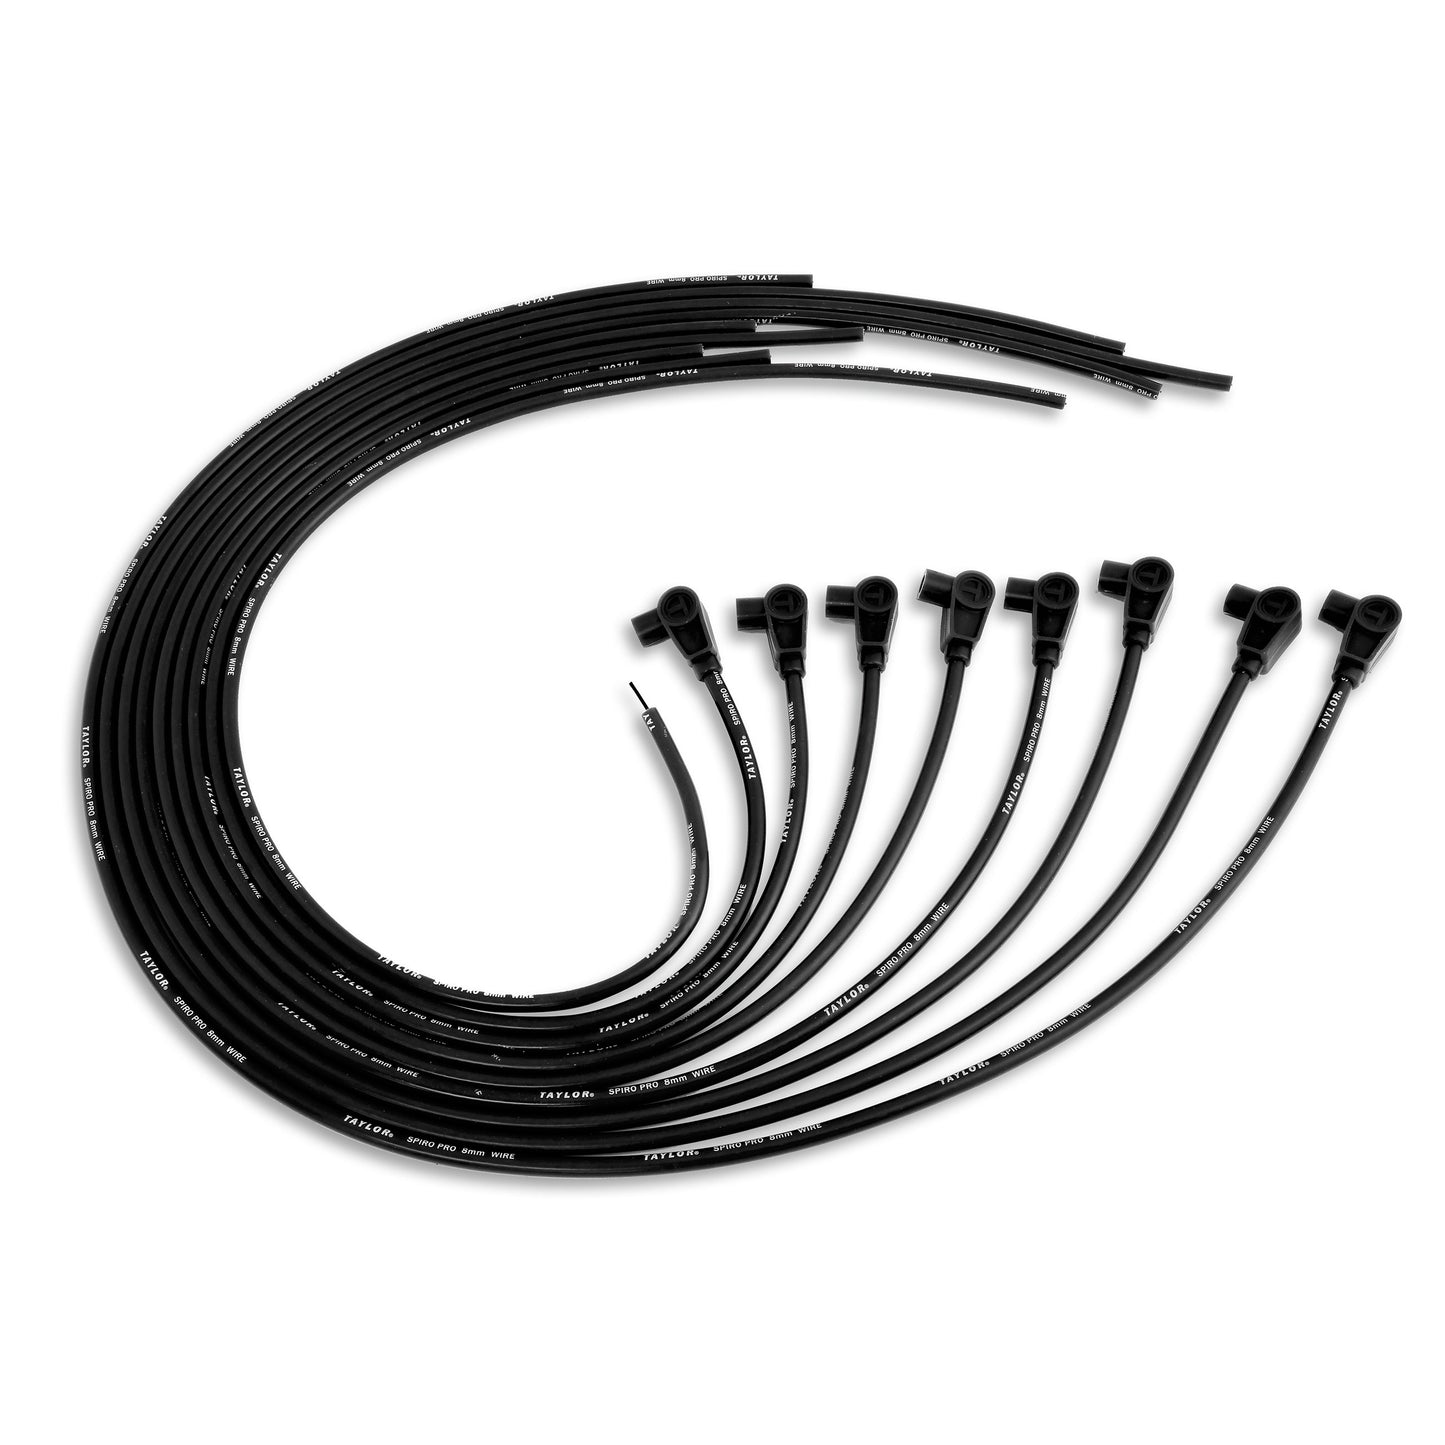 Taylor Cable 73051 8mm Spiro-Pro Ignition Wires univ 8cyl 90 black